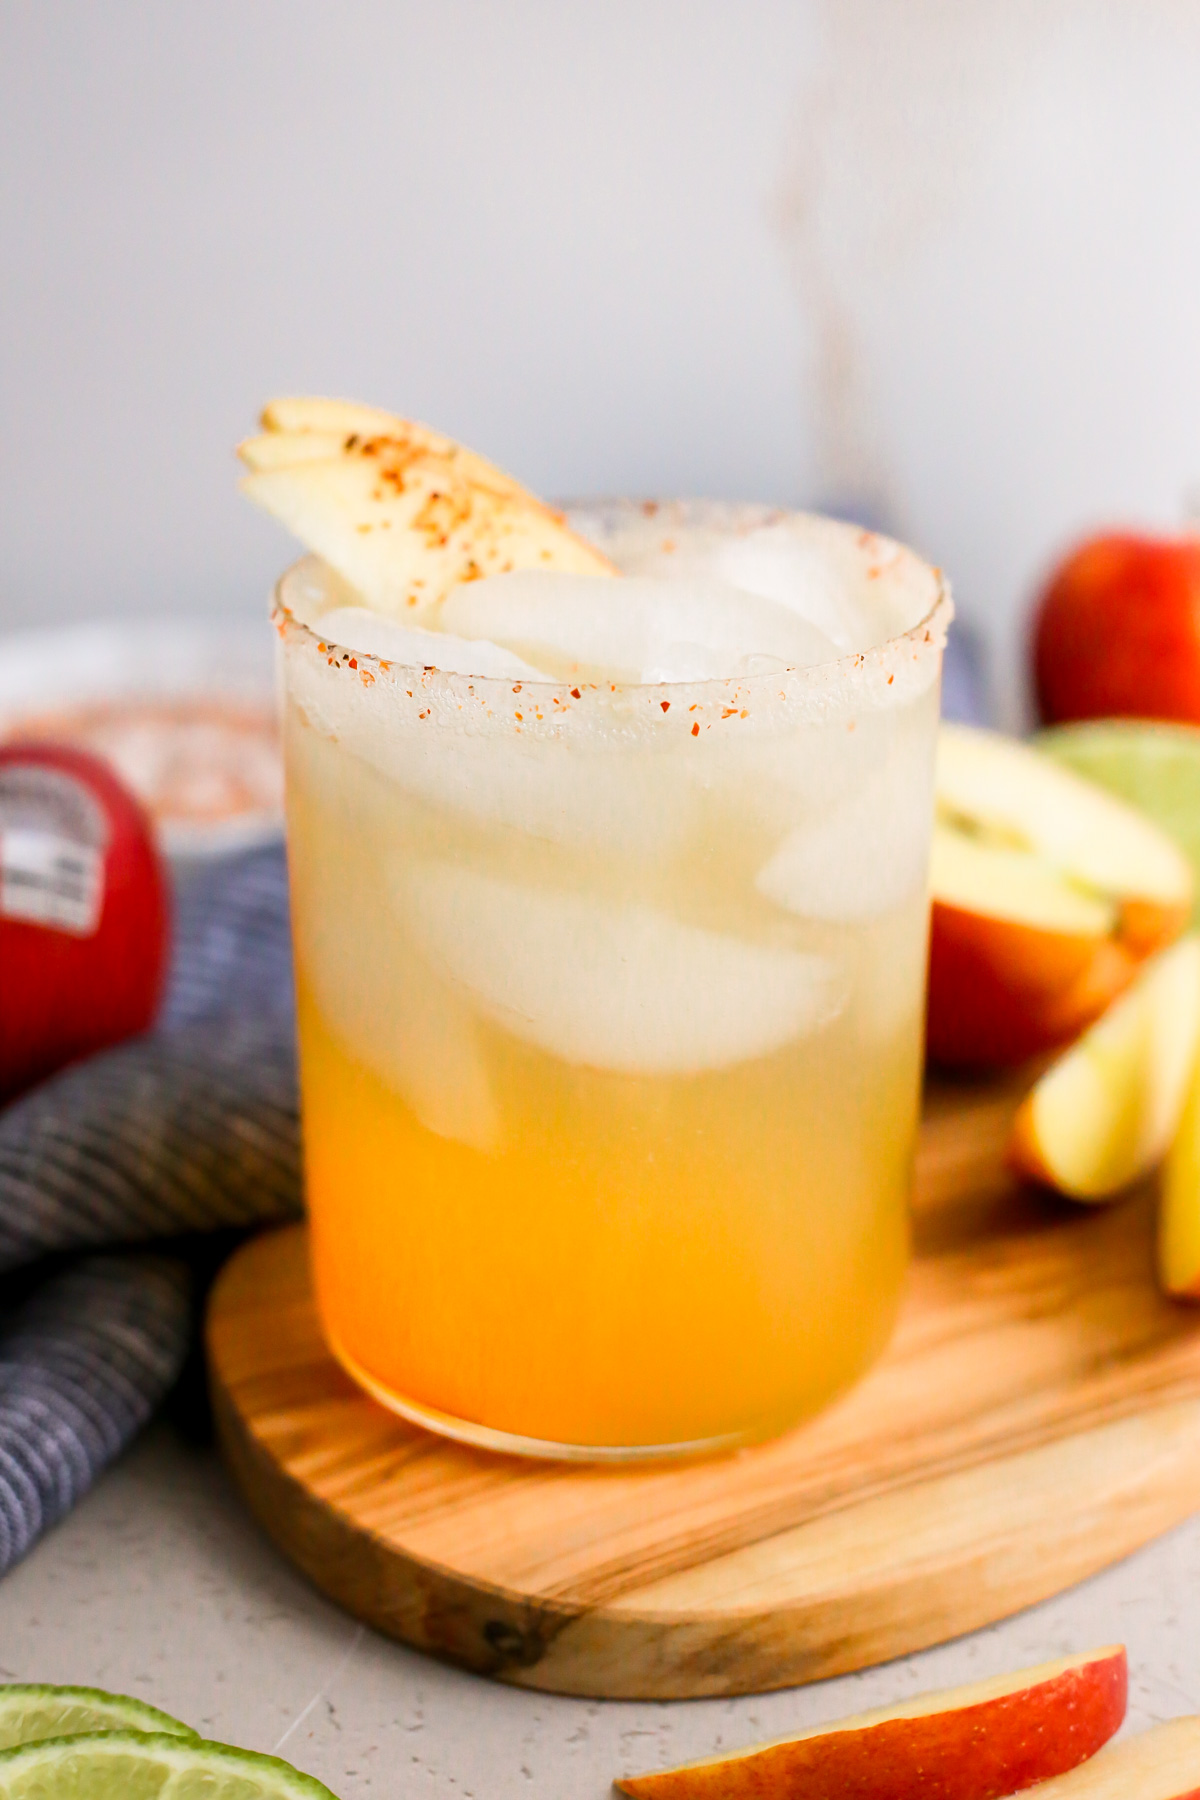 An apple margarita mocktail served in a clear cocktail glass with a sugar-tajin rim and garnish made with Envy apples